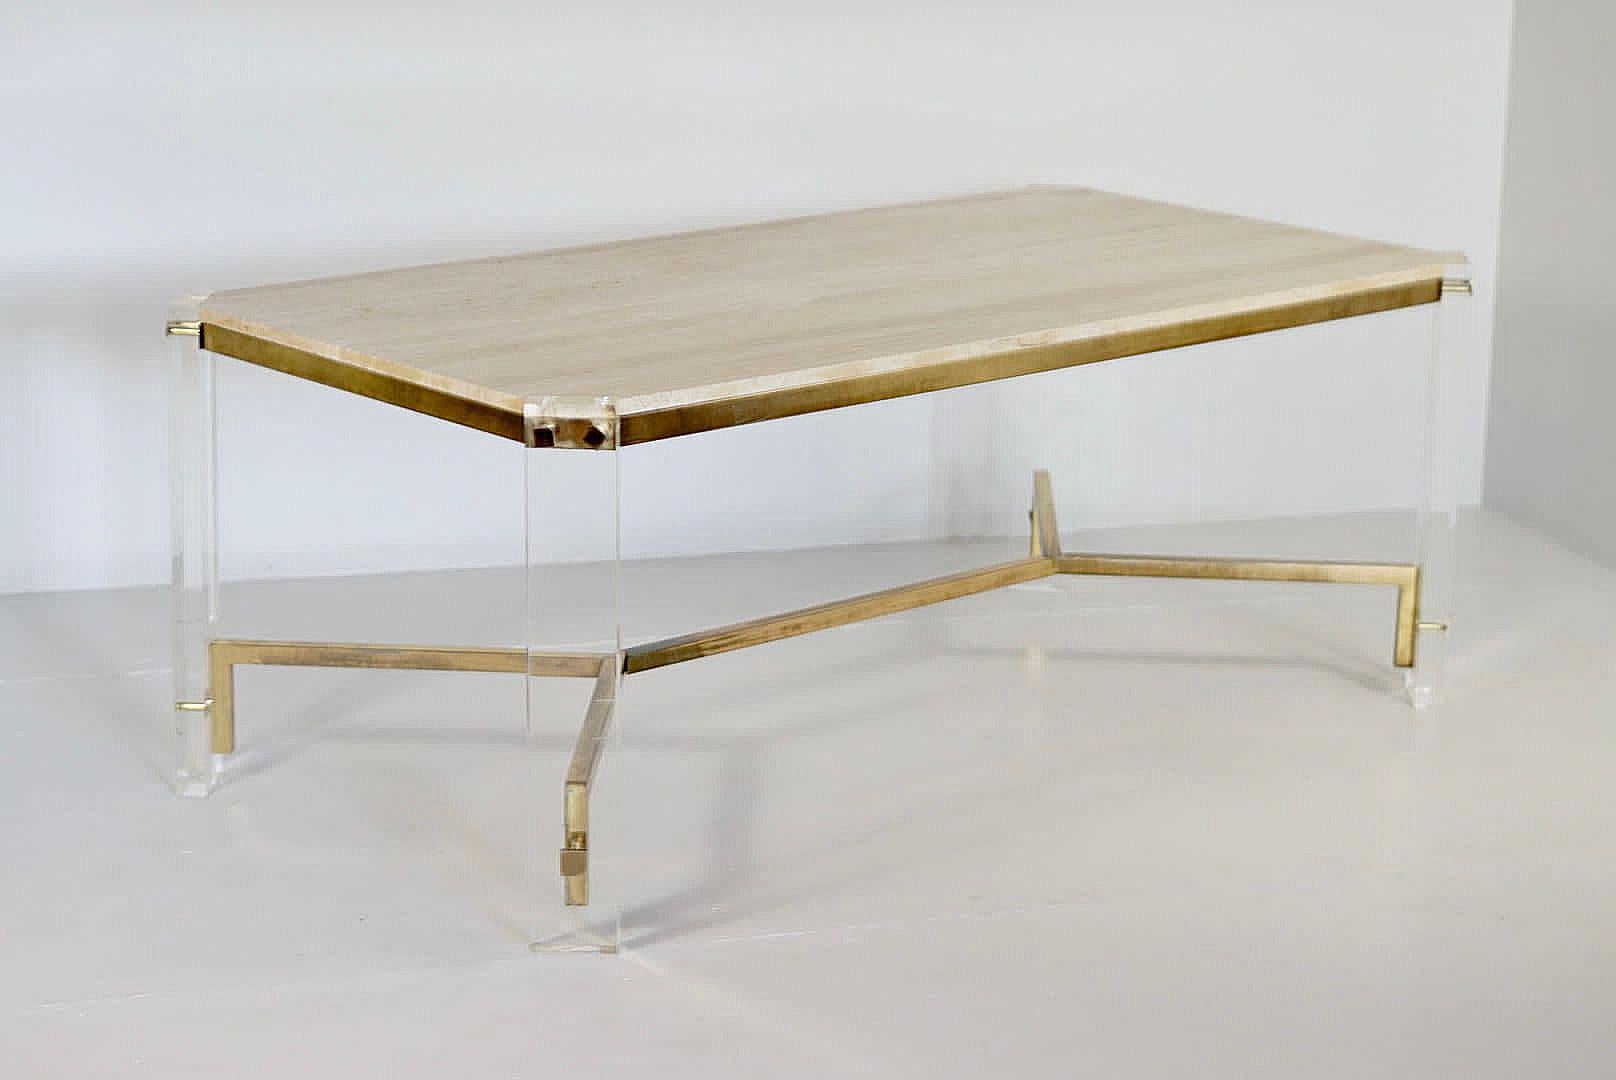 Exclusive dining table in brass and travertine with lucite legs.

in absolute perfect condition with little usage marks.

Video on request.

Height 74cm

Depth 100cm

Width 190cm